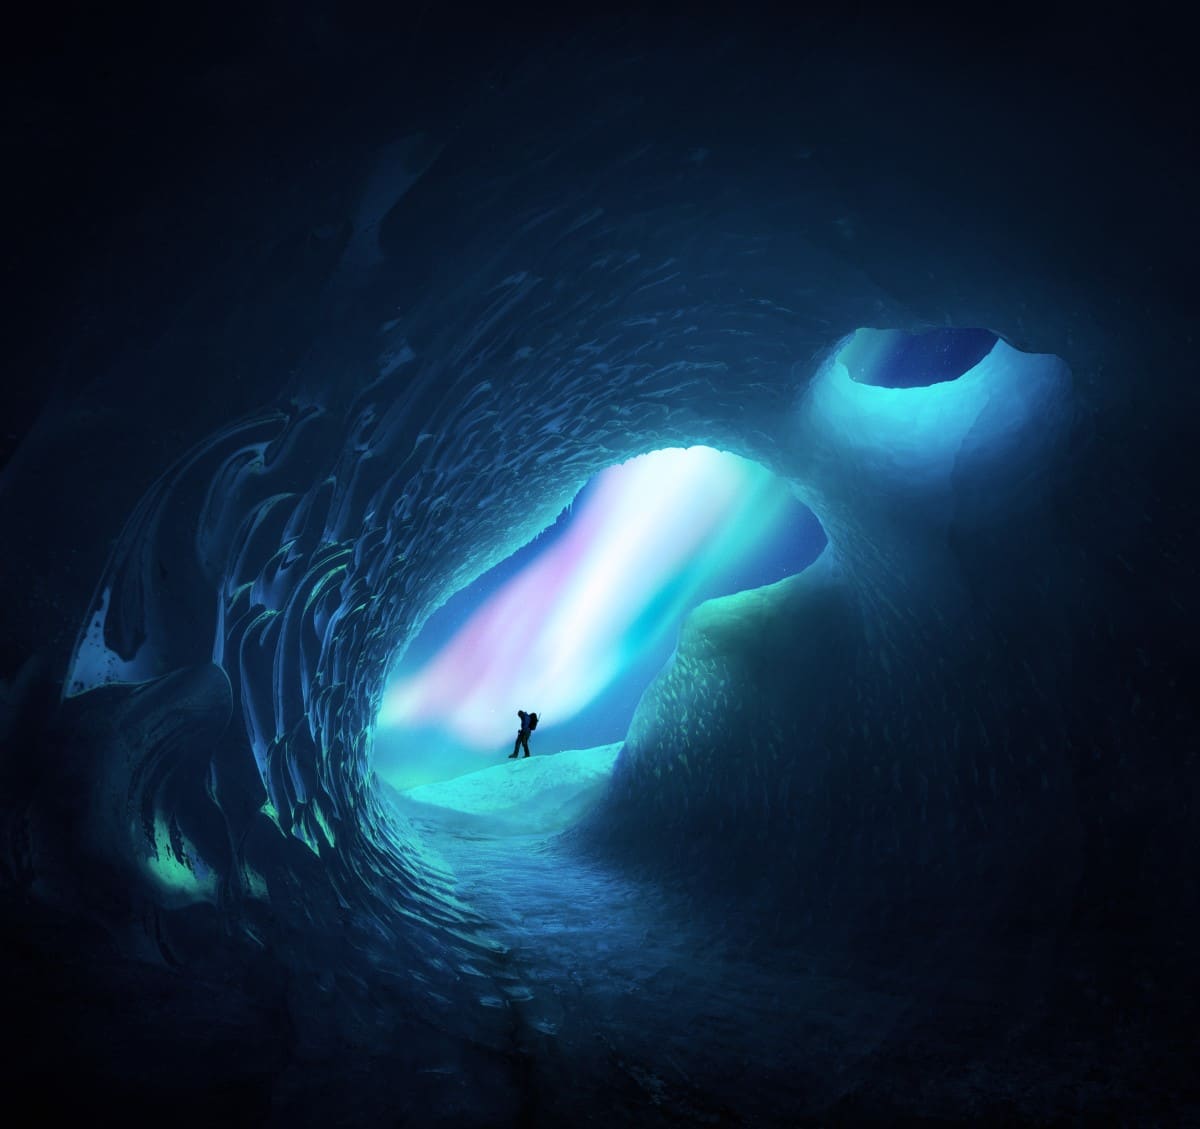 Glacier ice cave with Northern Lights